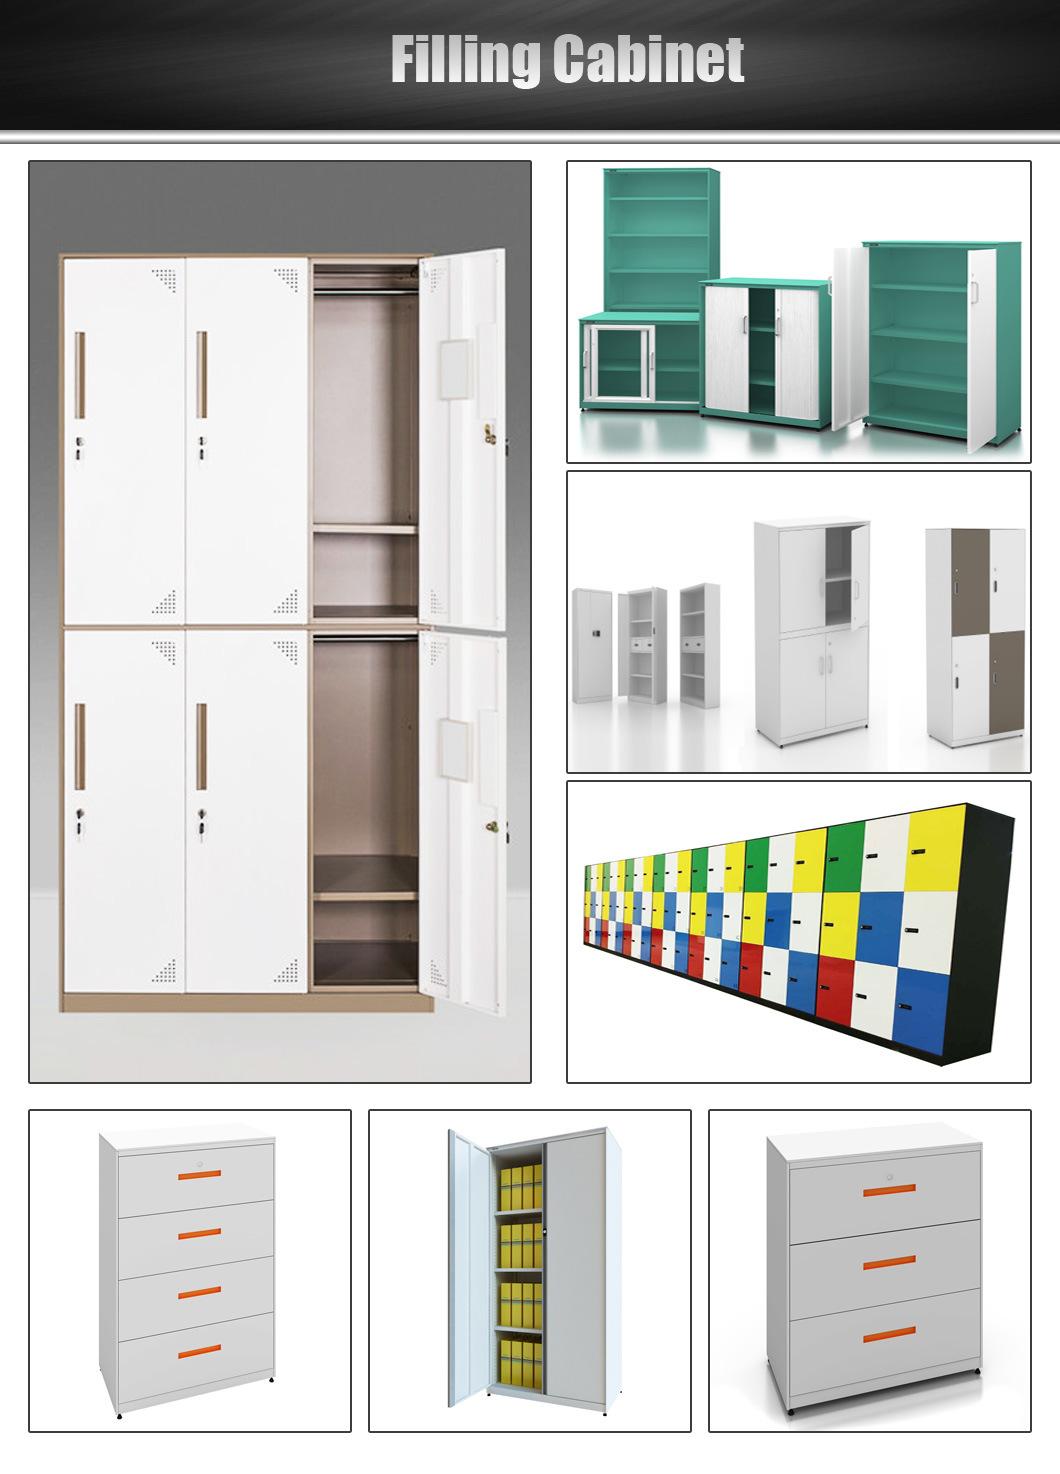 Quality Assured Work Storage Cabinets with Environmentally-Friendly Materials